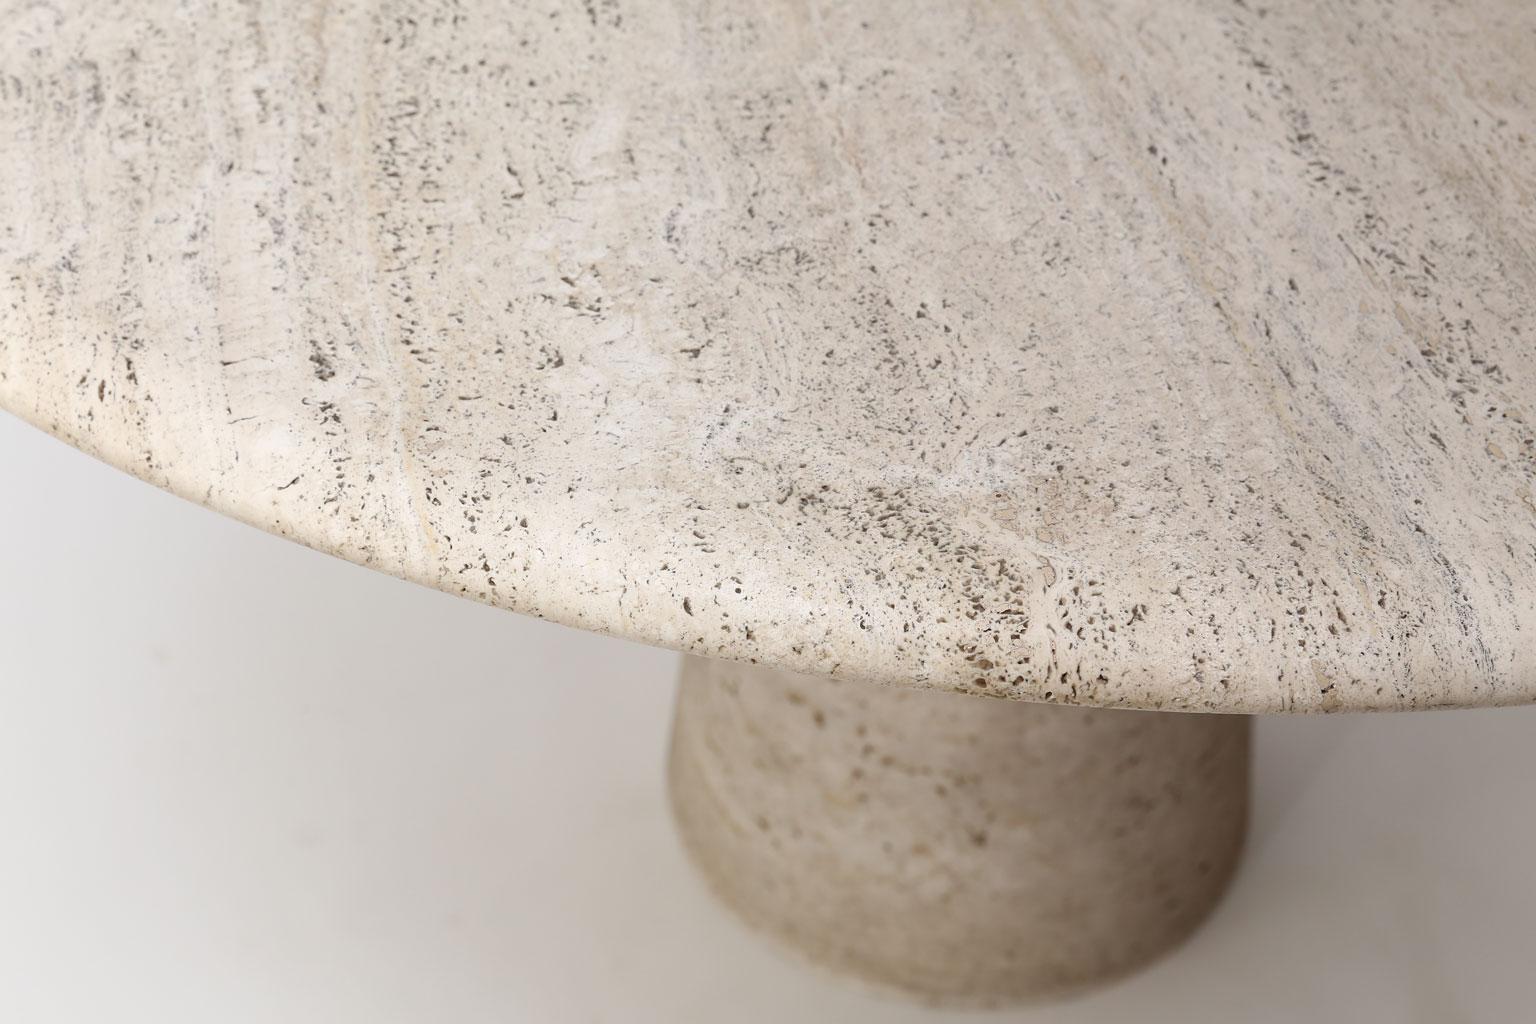 Round travertine table attributed to Angelo Mangiarotti Round travertine table attributed to Angelo Mangiarotti (circa 1970s). Round smoothed-edge 50 inch diameter top rests open a pedestal that tapers upwards from the floor. Table can easily seat